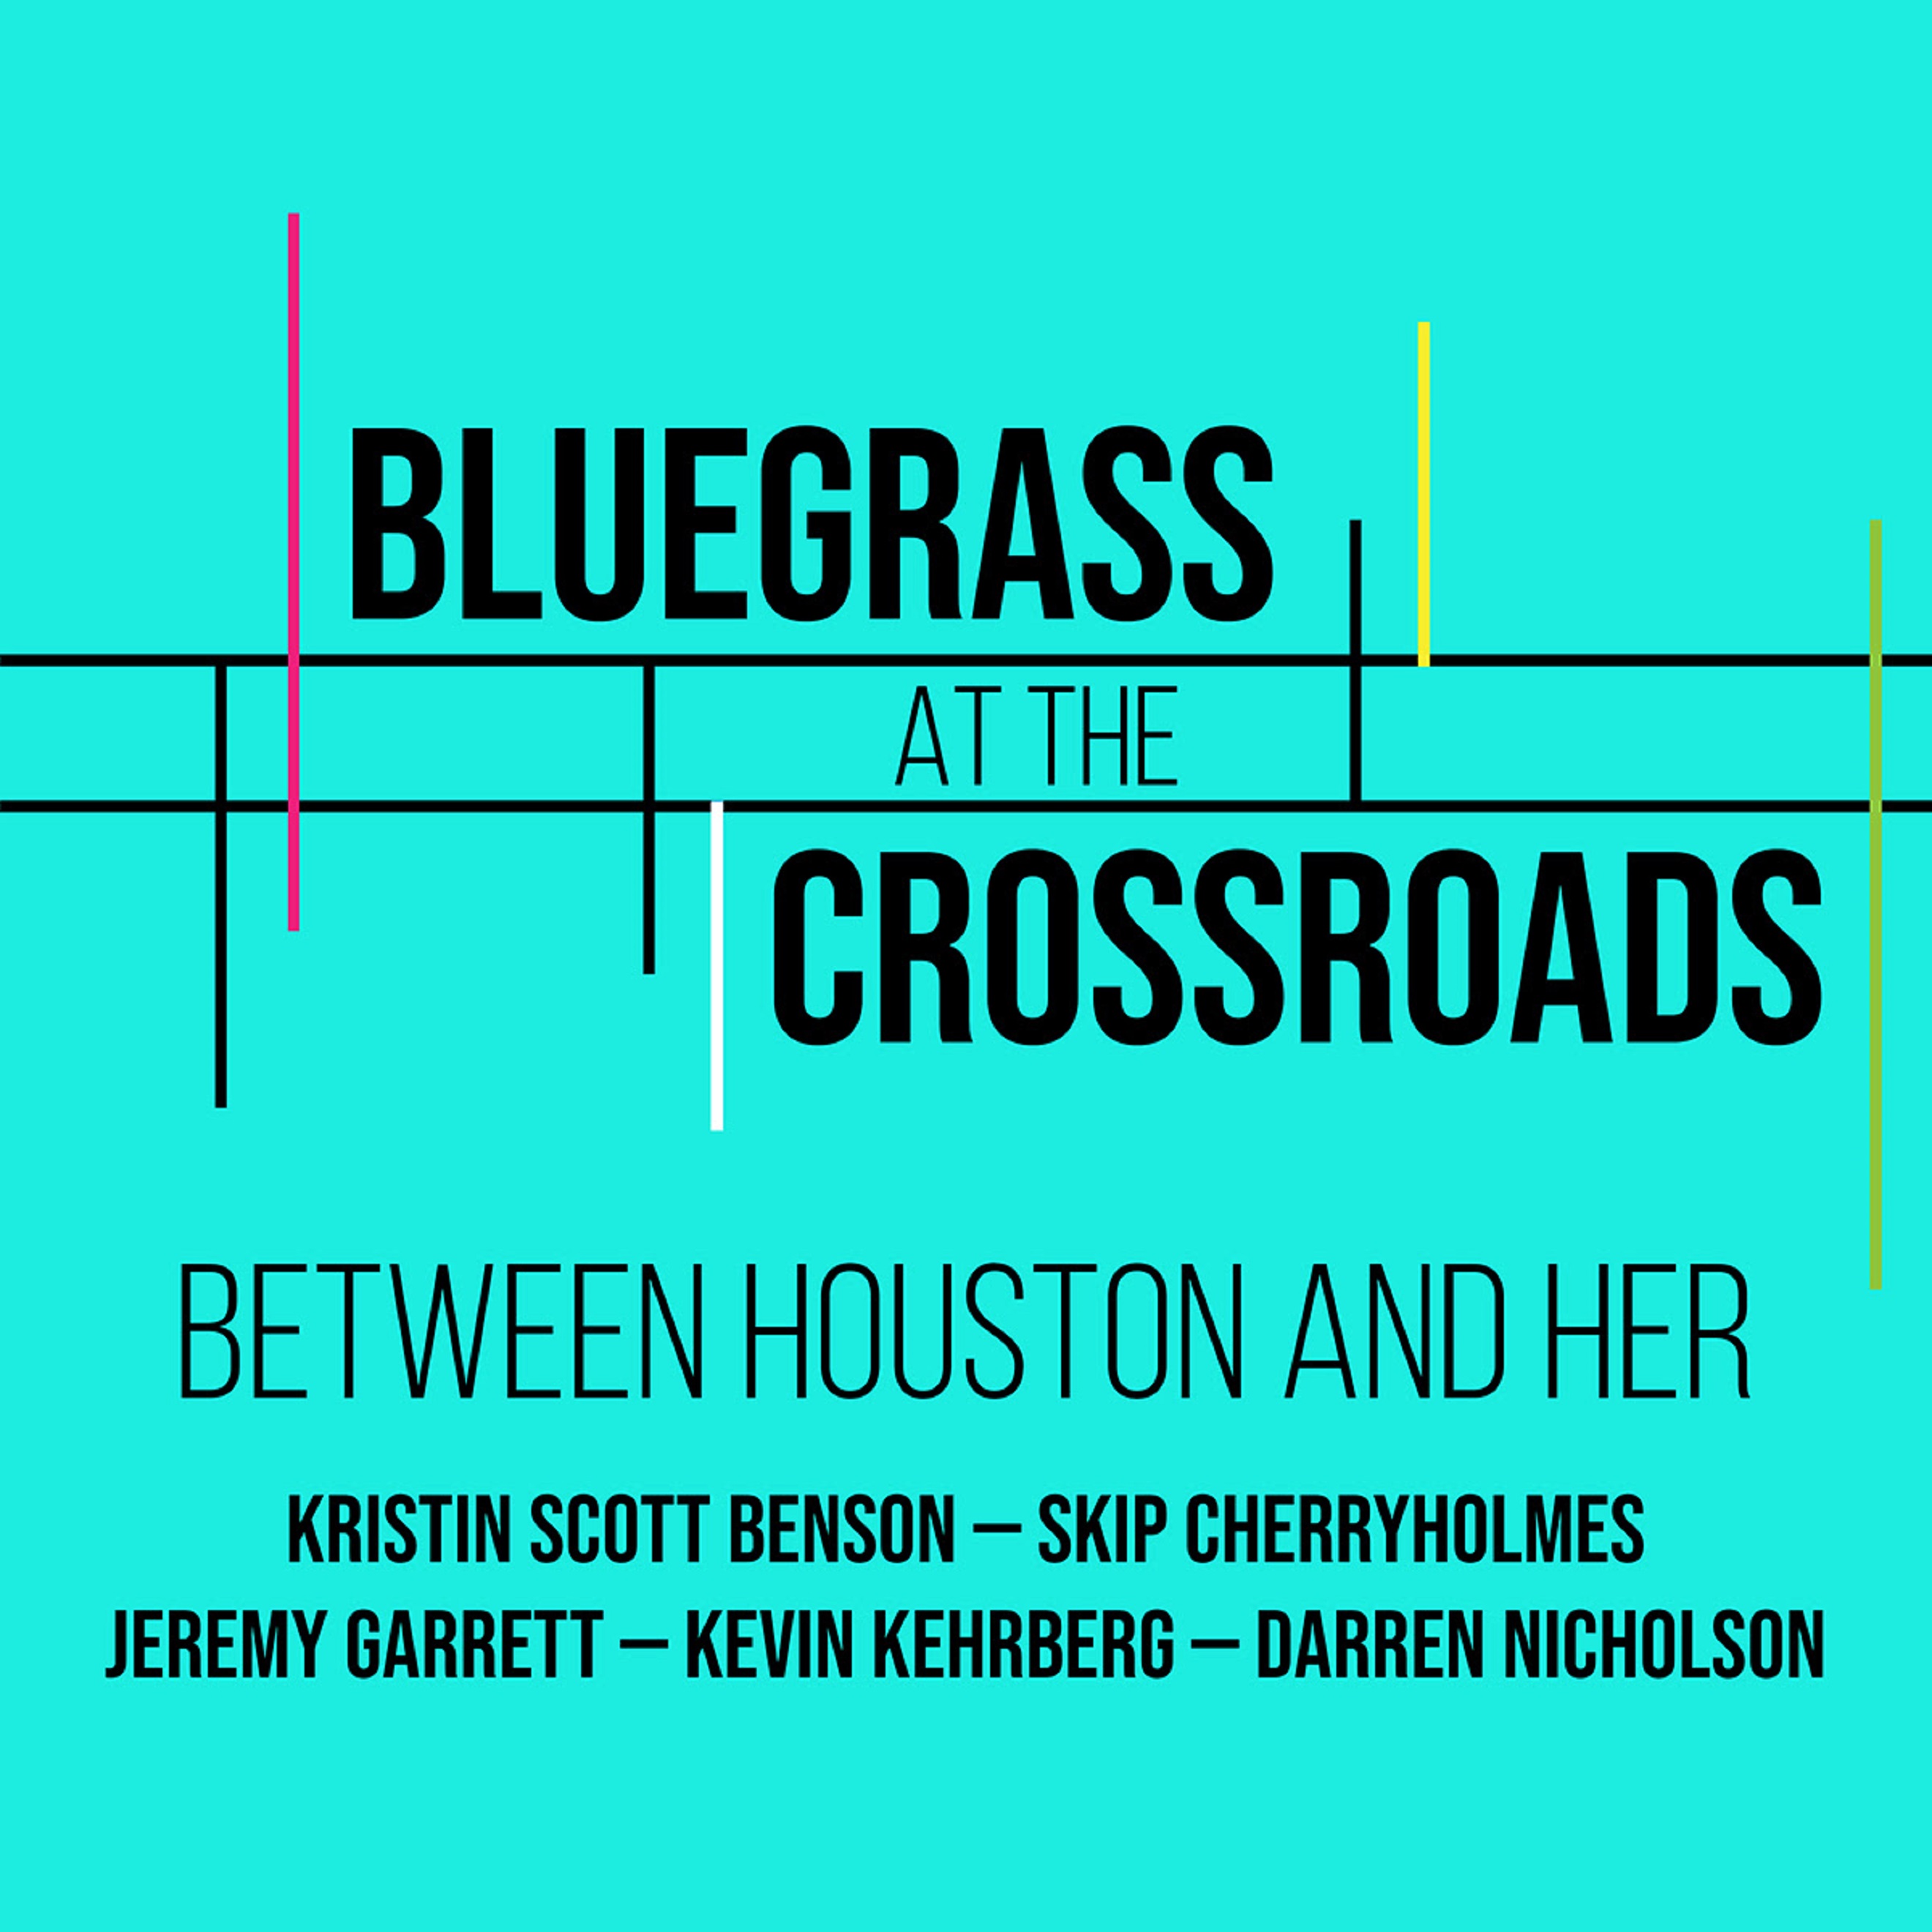 Bluegrass at the Crossroads lineup returns on “Between Houston and Her”